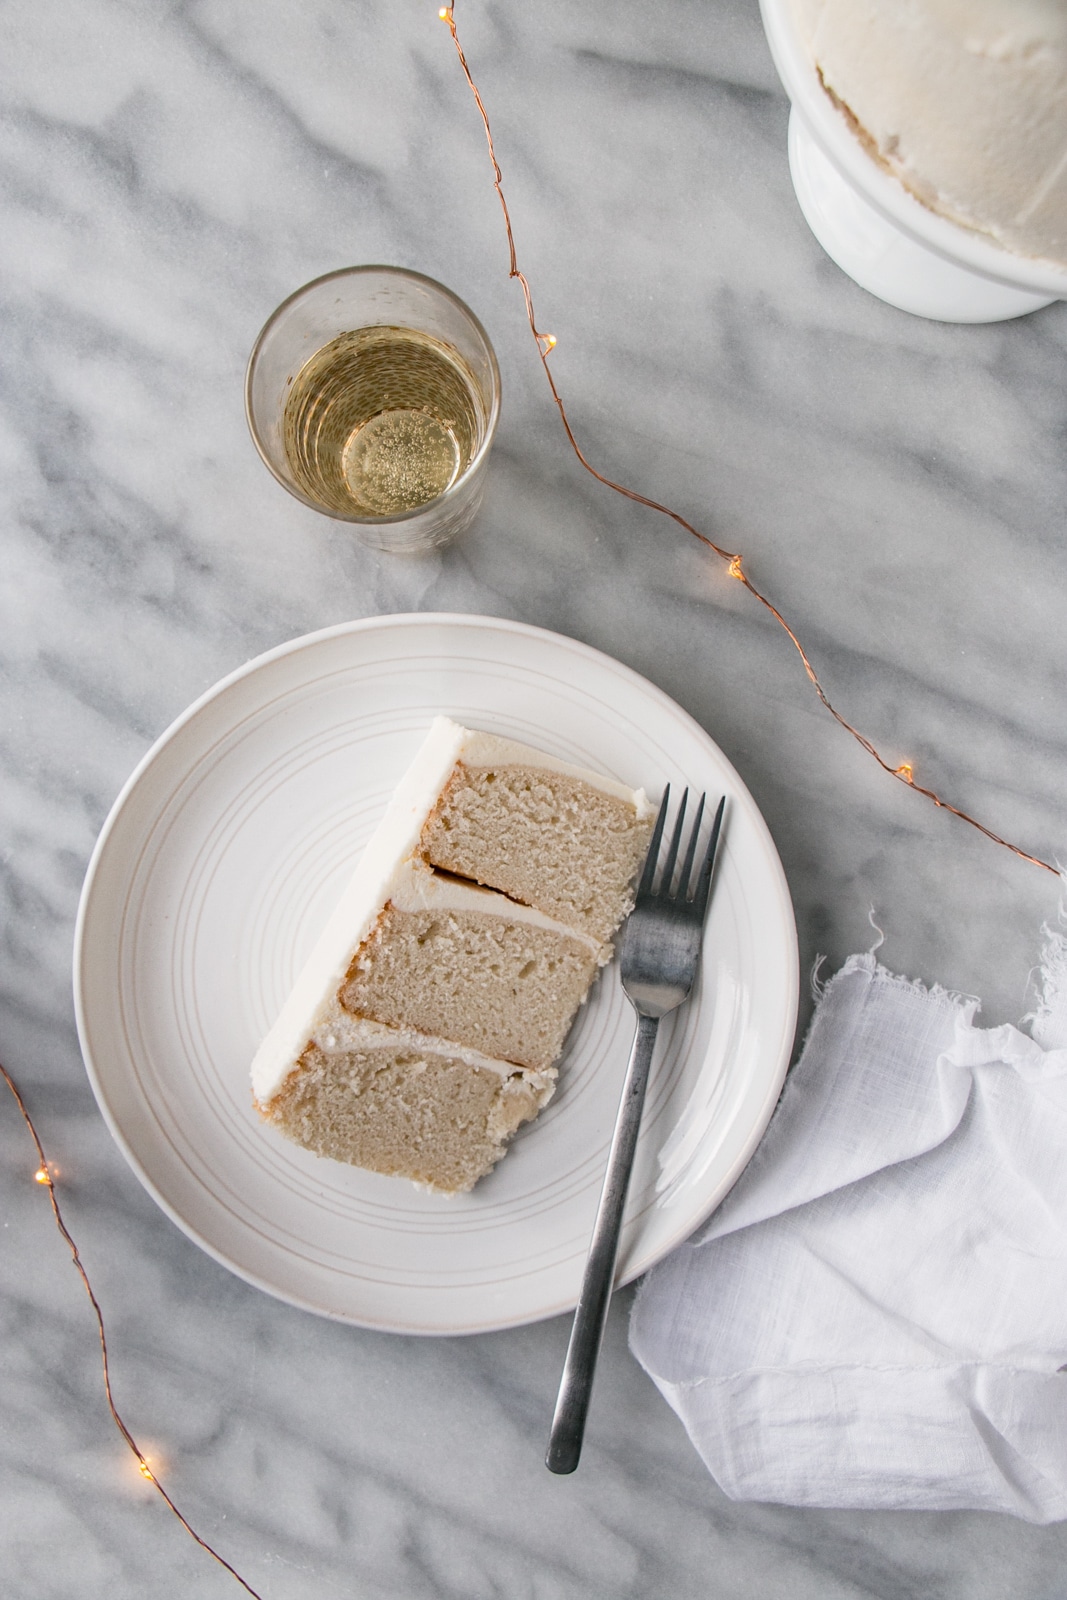 This Champagne Vanilla Bean Layer Cake is perfect to celebrate the holidays or any birthday! #cake #birthday #champagne